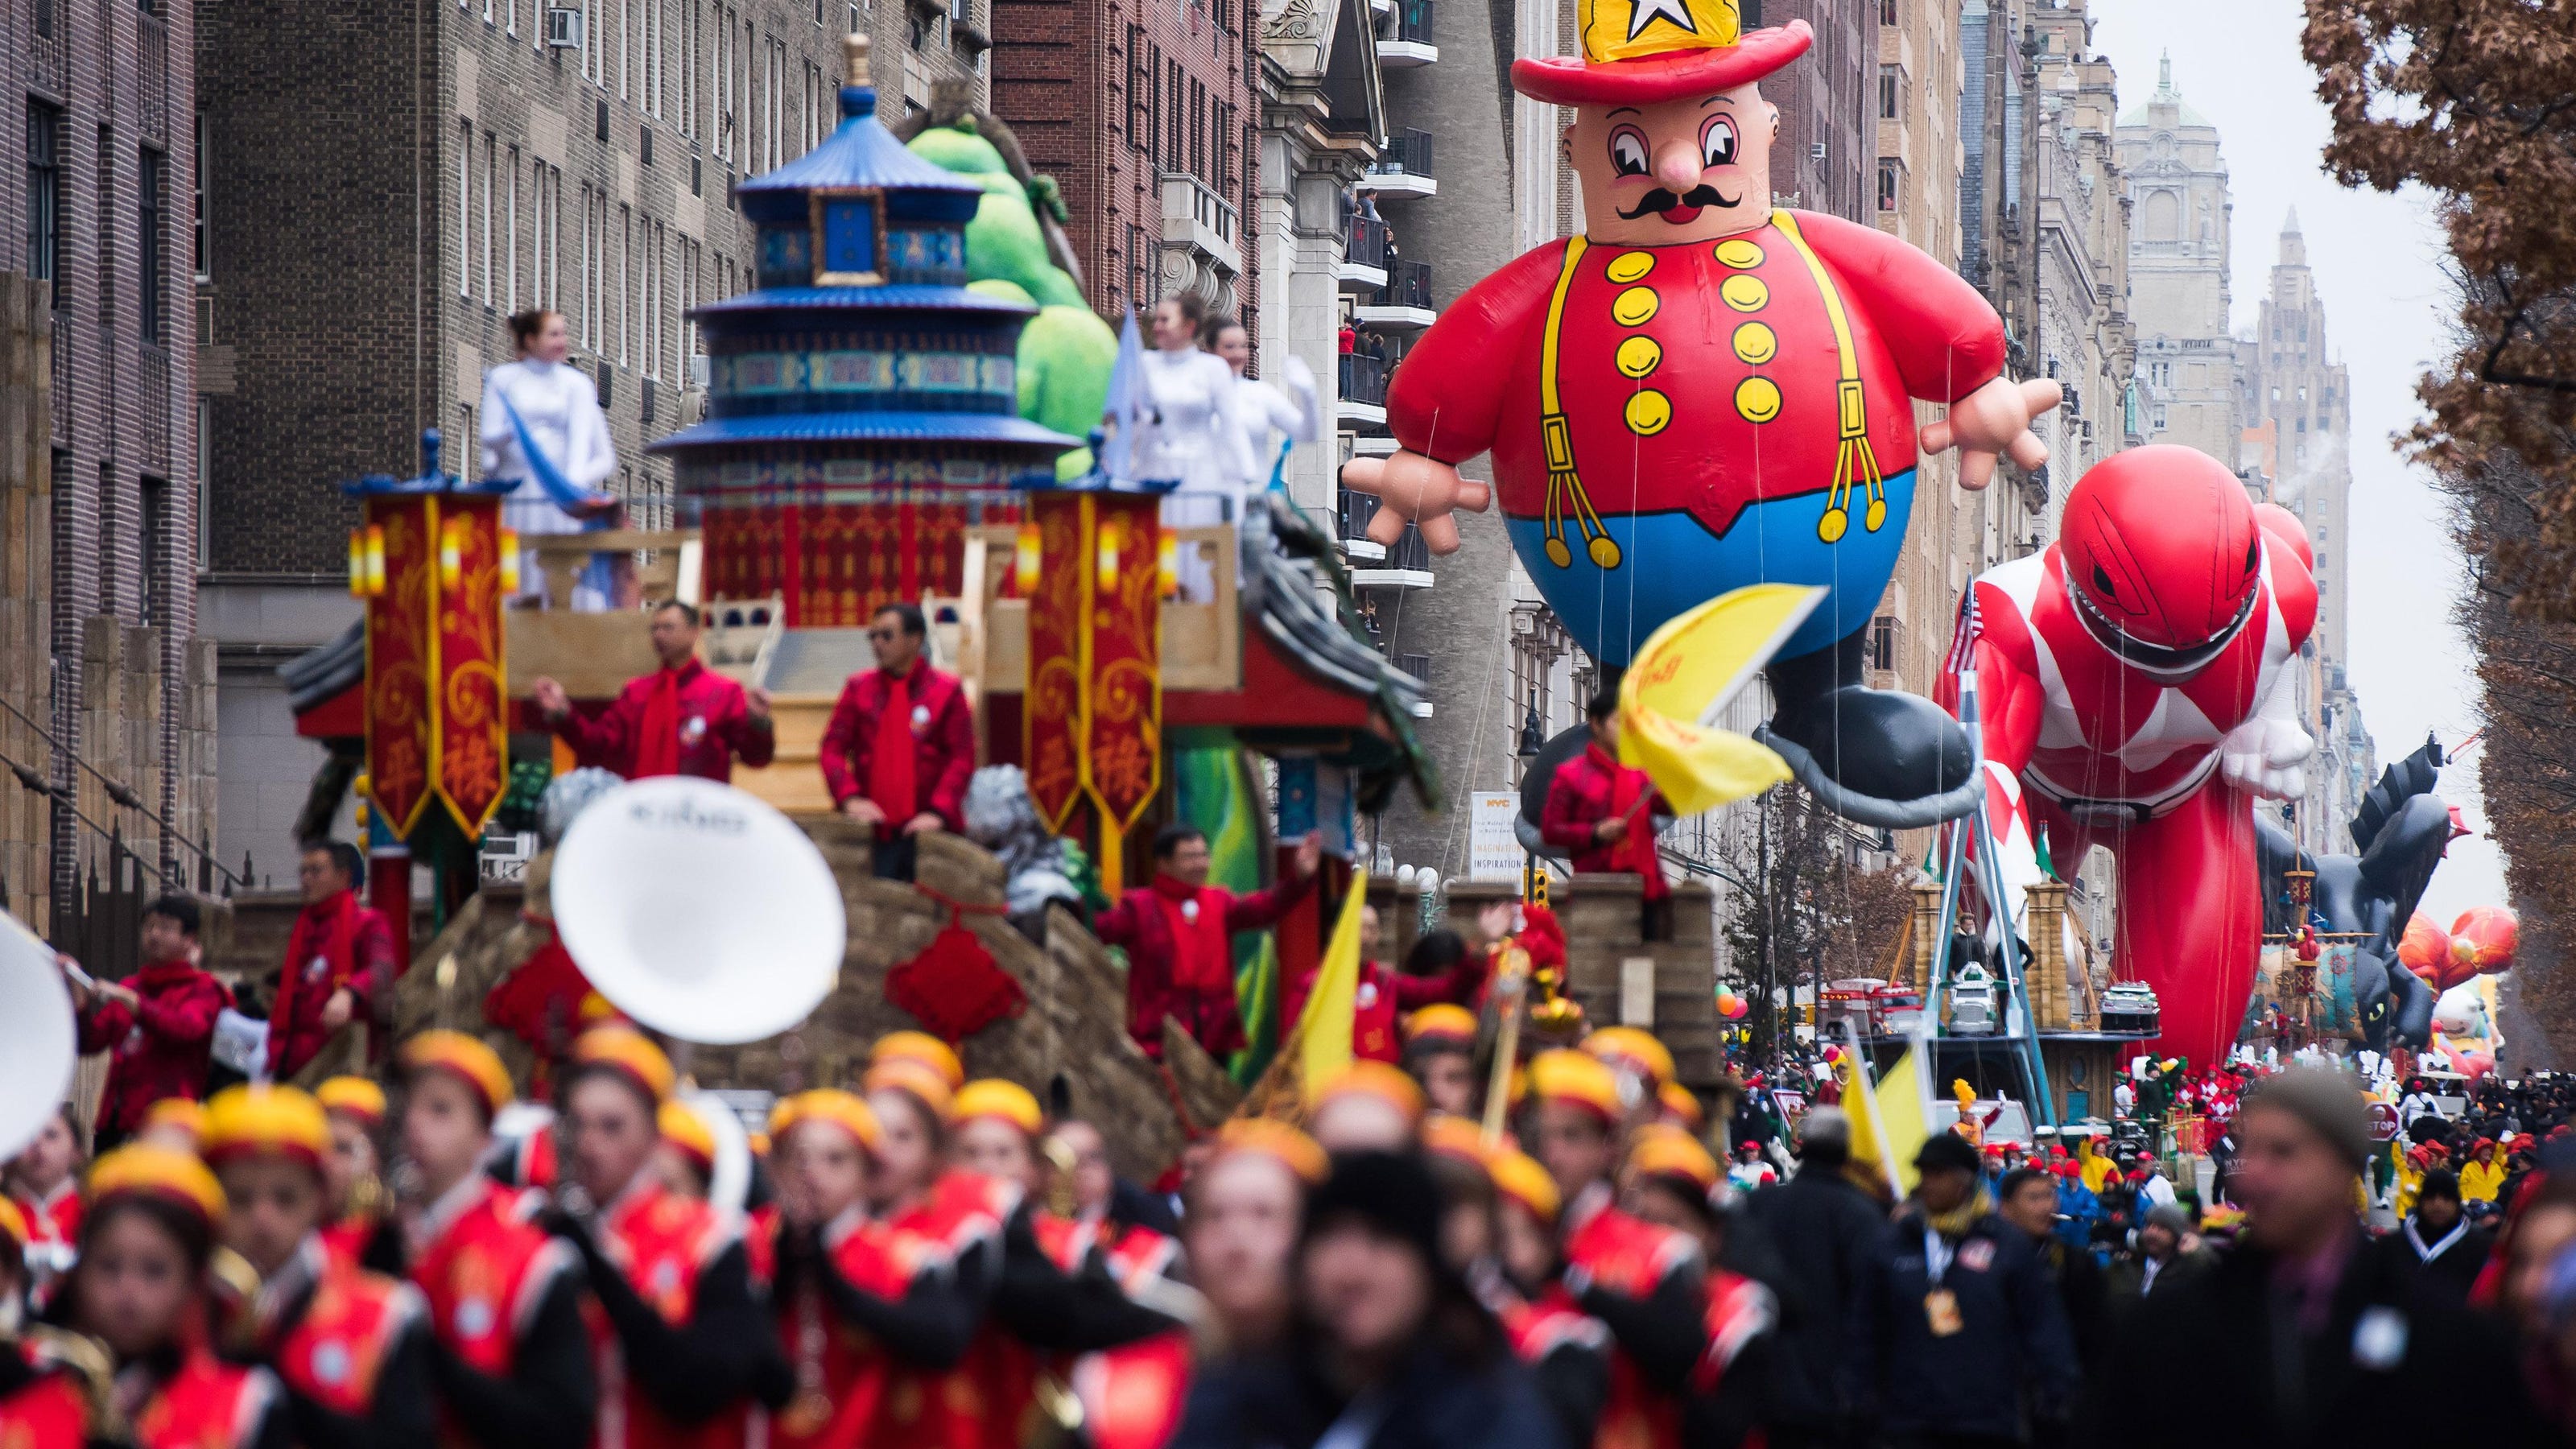 TV Watch ‘Thanksgiving parade’ on NBC and CBS